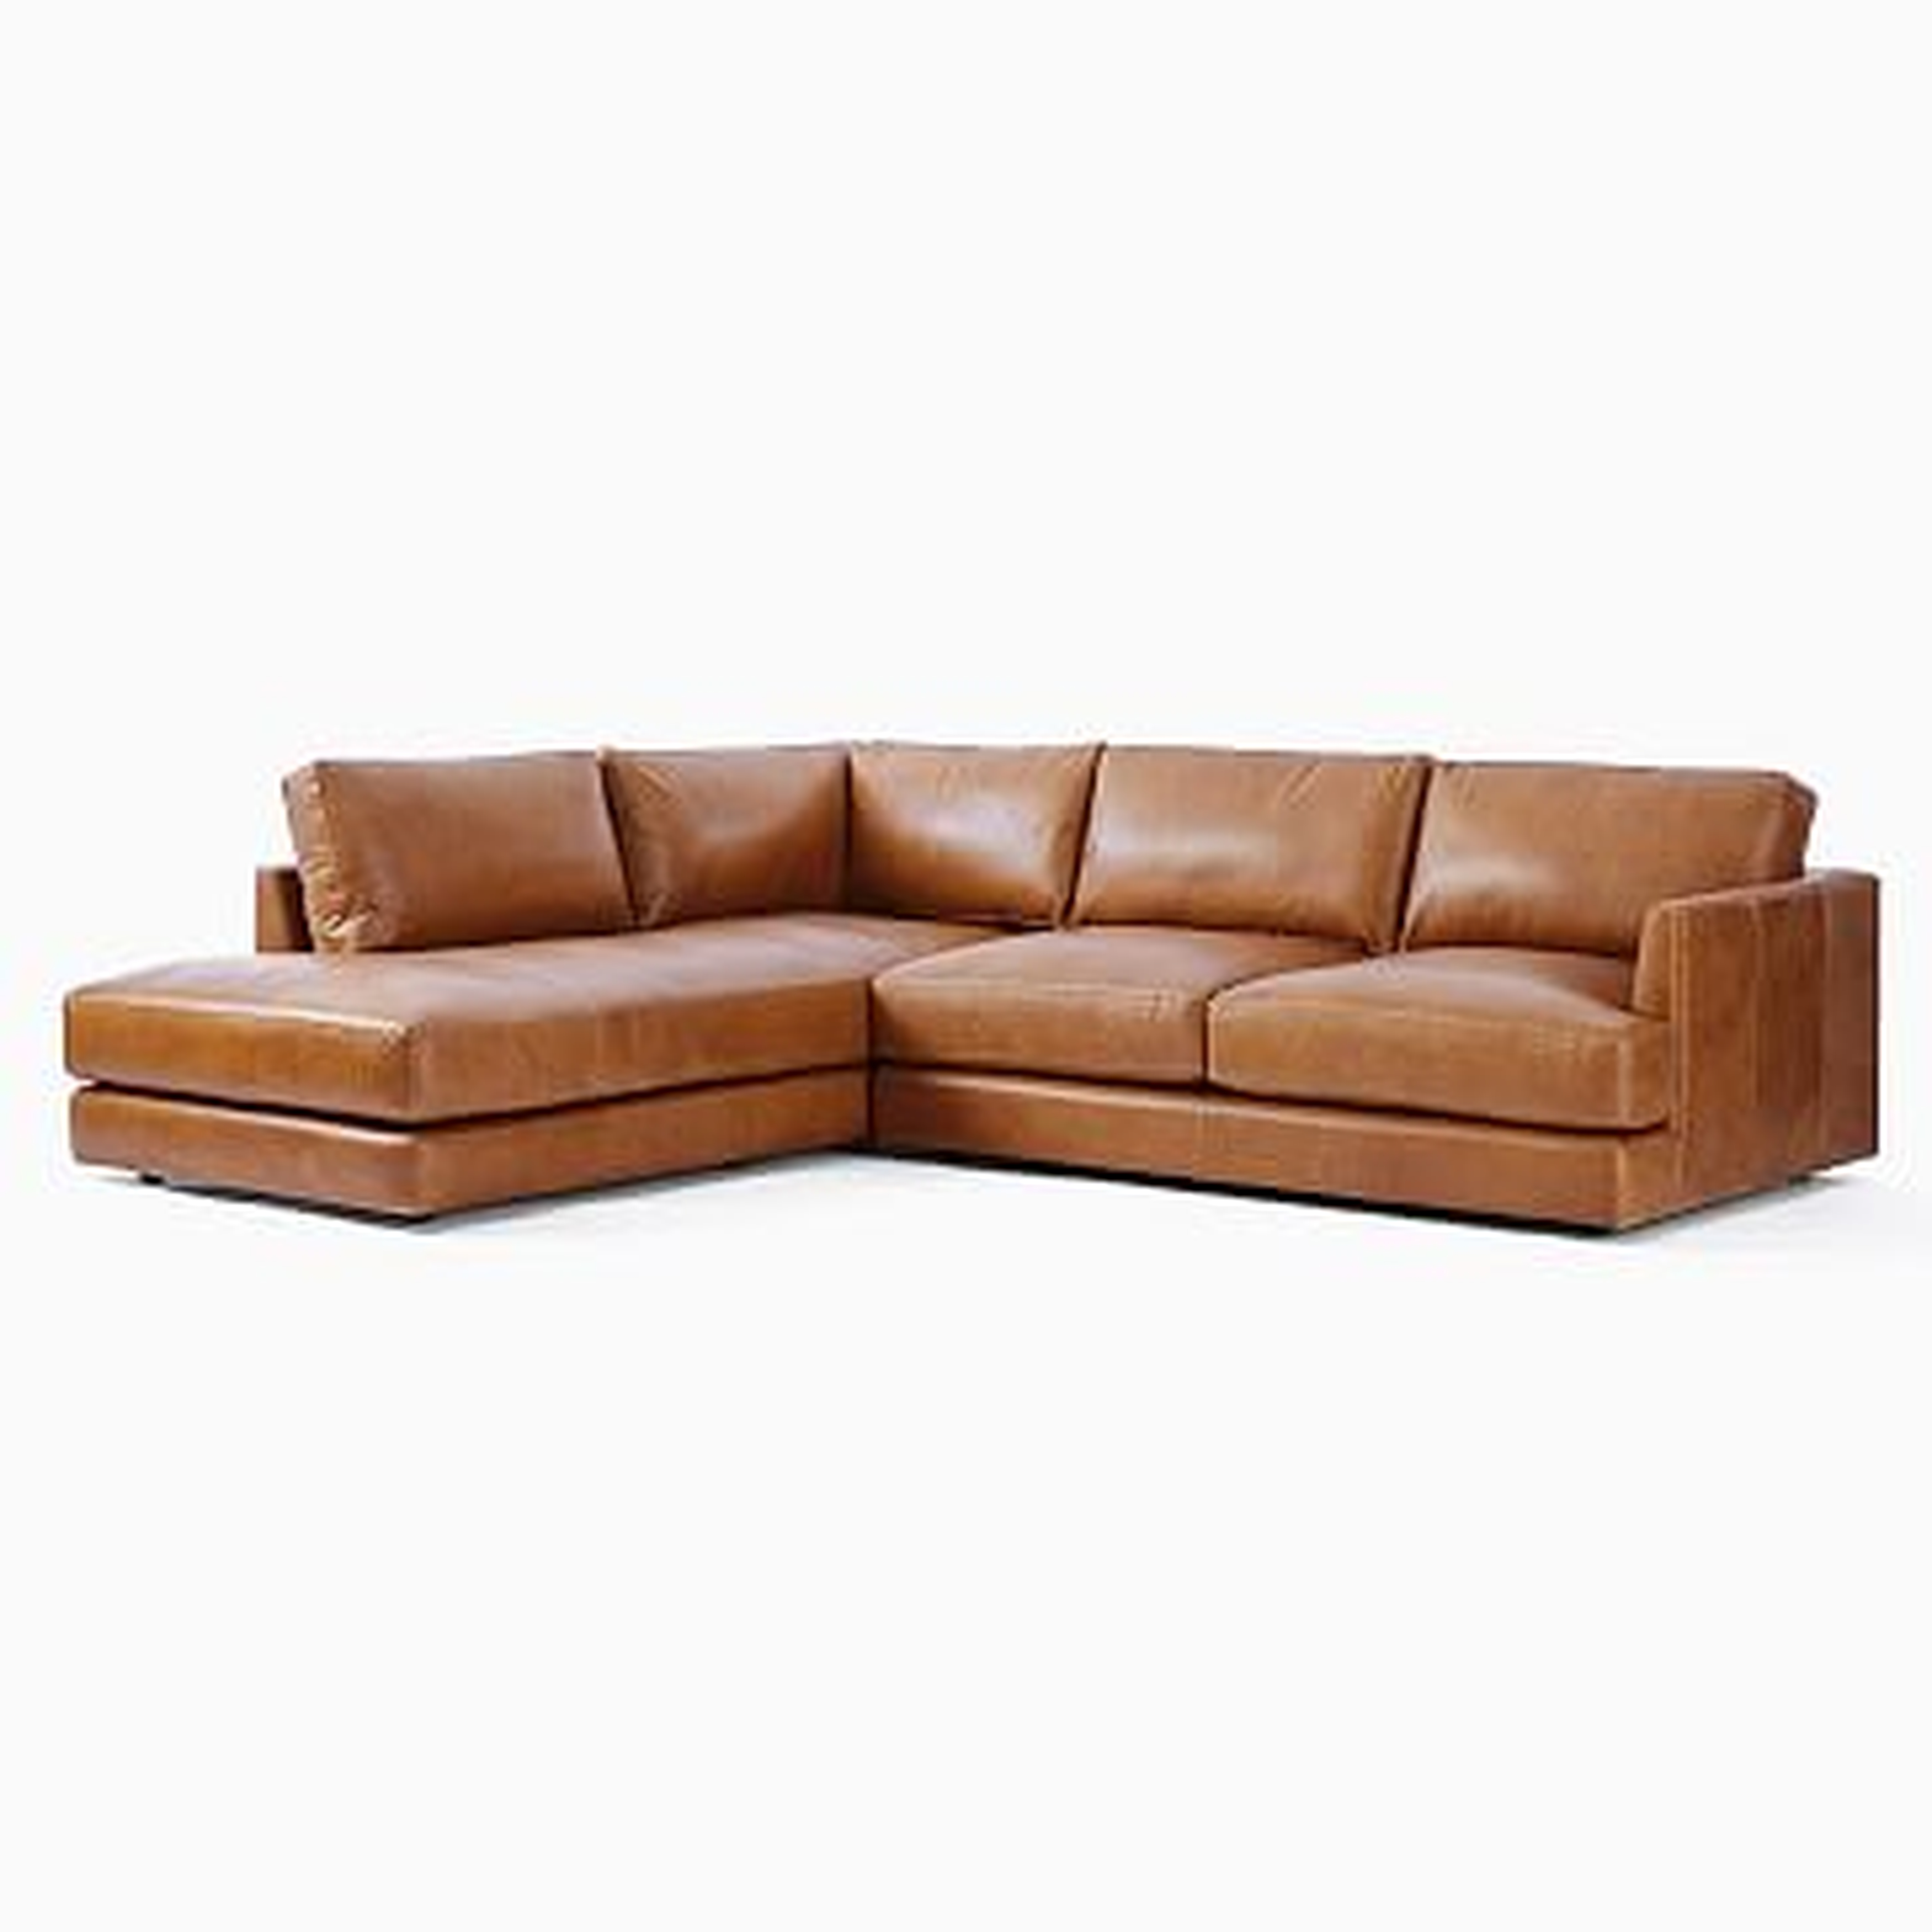 Haven Sectional Set 02: Right Arm Sofa, Left Arm Terminal Chaise, Poly, Saddle Leather, Nut - West Elm